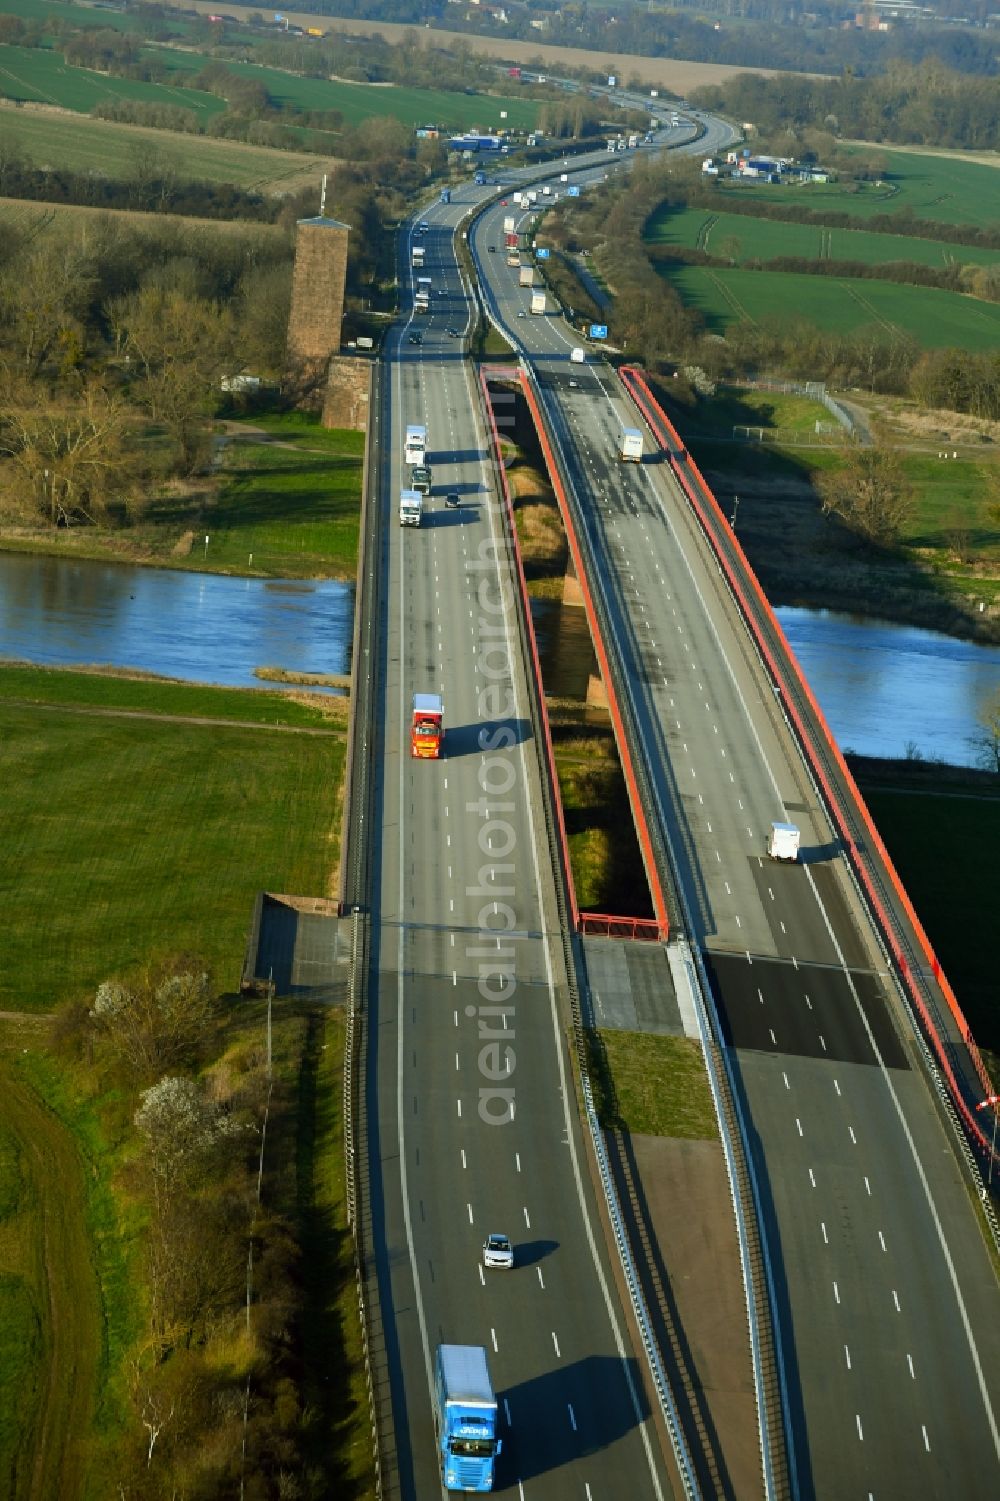 Aerial image Vockerode - Routing and traffic lanes over the highway bridge in the motorway A 9 - Elbebruecke Vockerode in Vockerode in the state Saxony-Anhalt, Germany